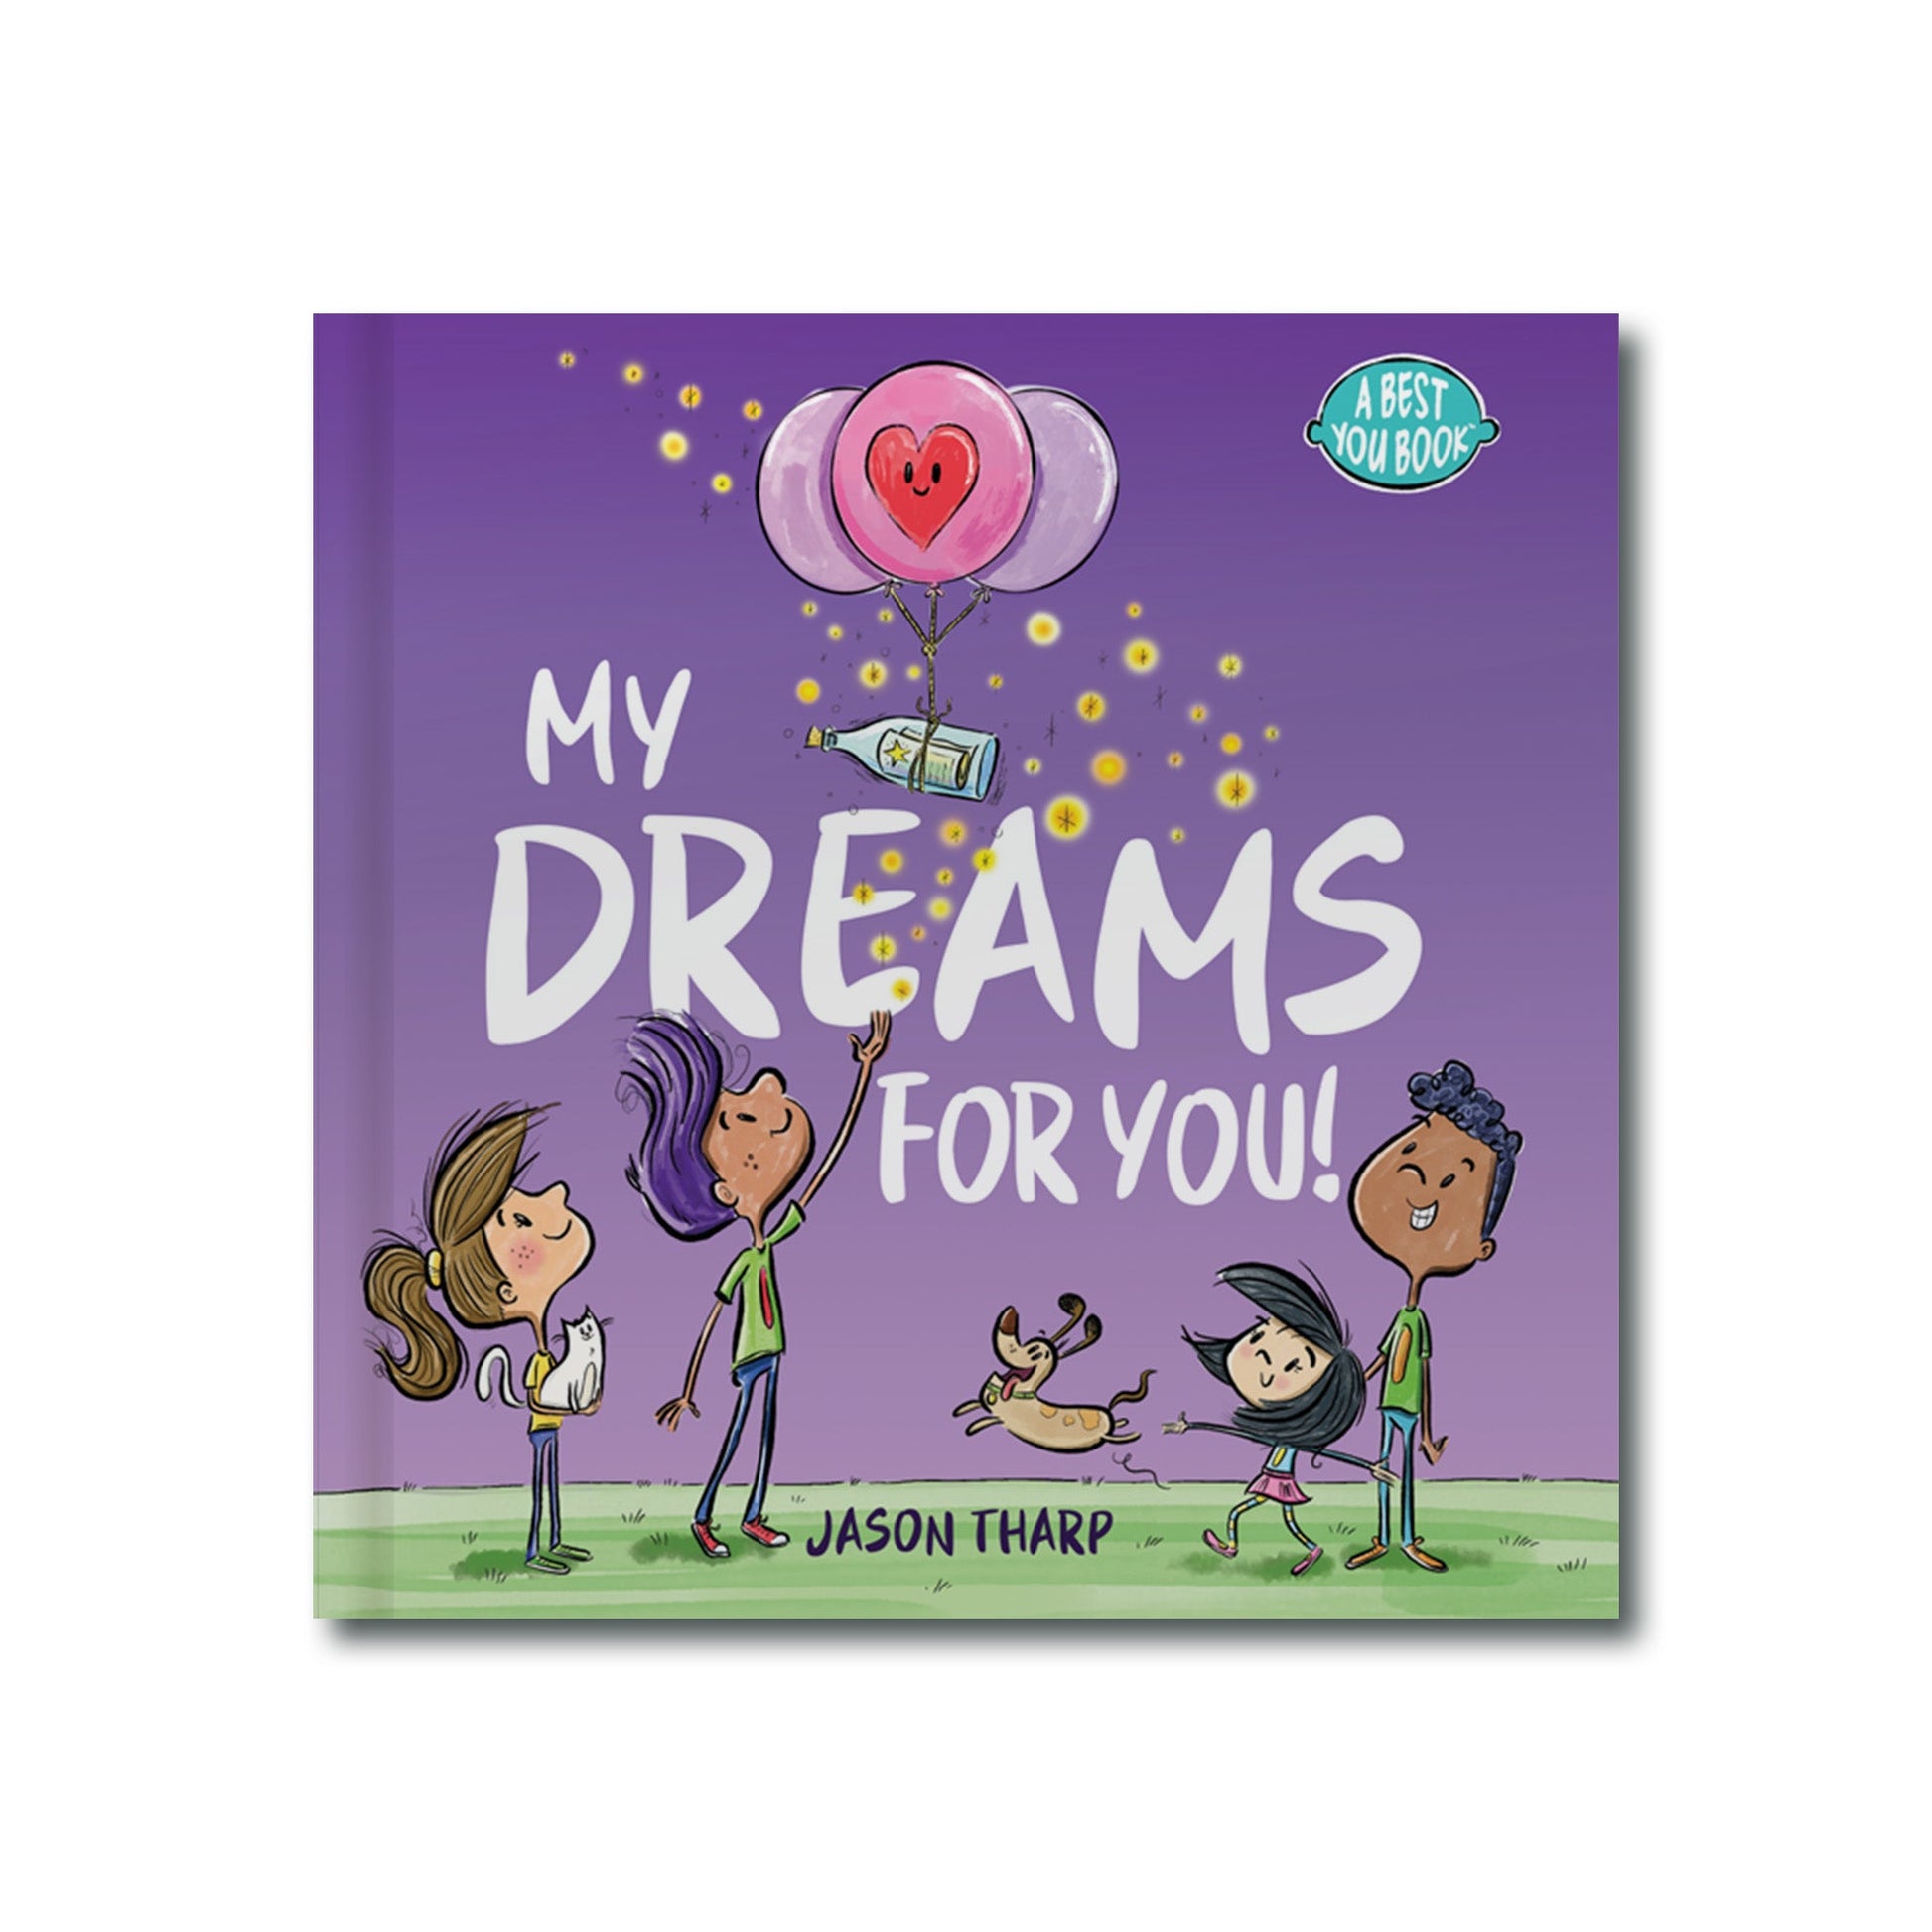 Wonderville Studios Book My Dreams For You!